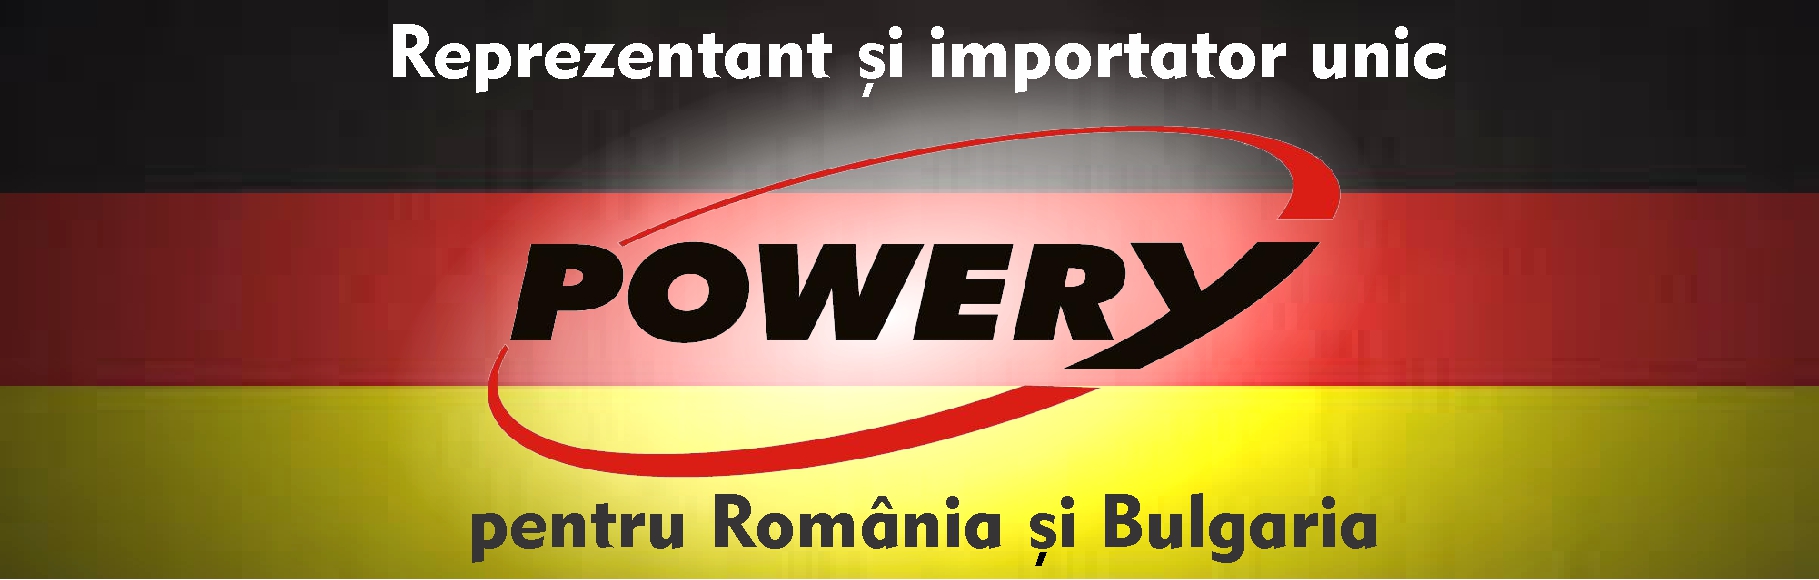 Powery Official representation